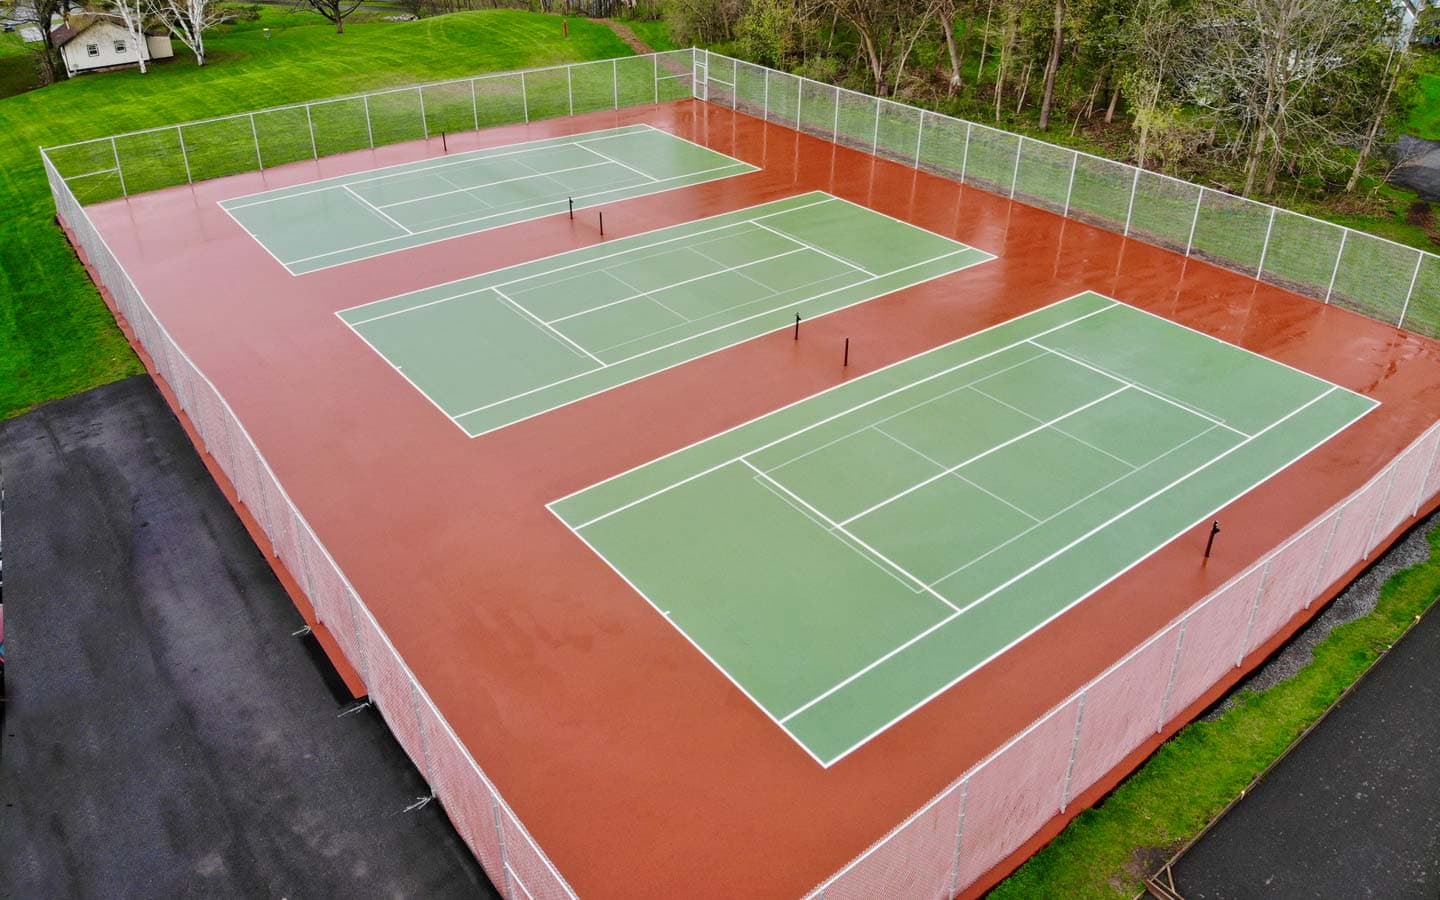 Town of Sullivan Tennis Courts (finished)